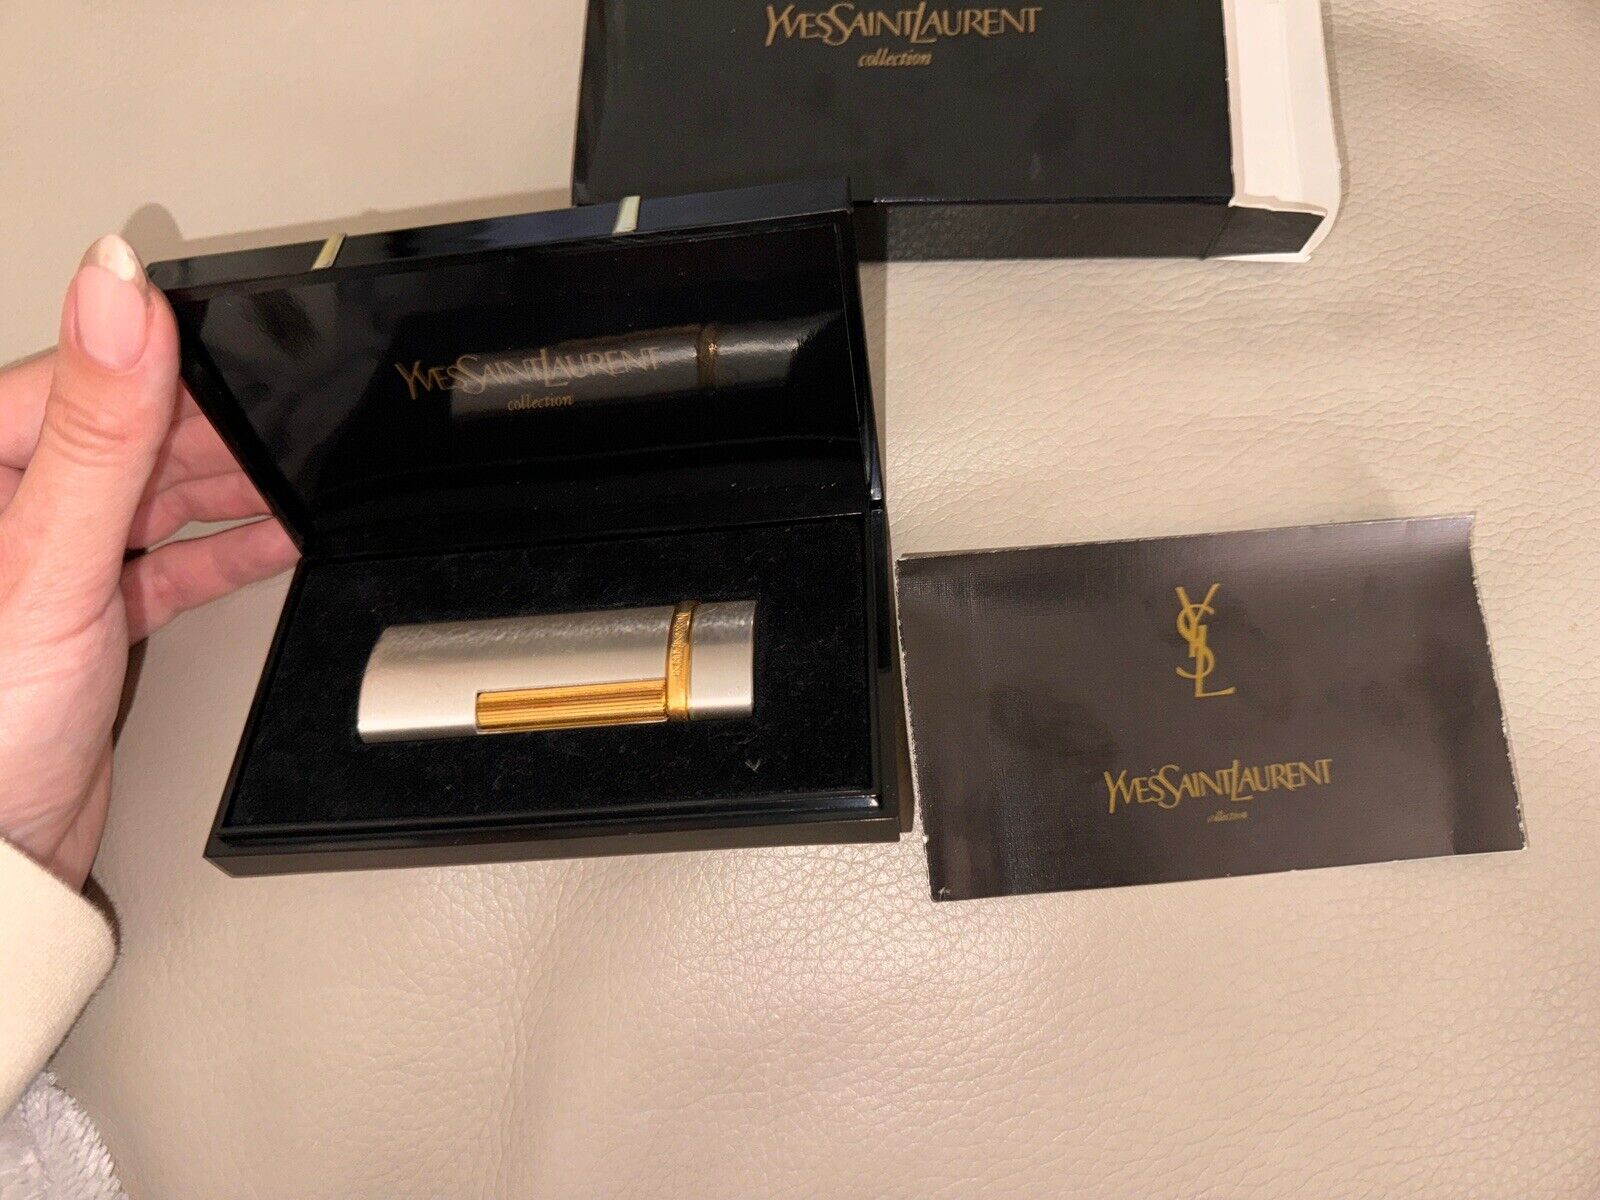 Yves Saint Laurent Torch Lighter and Box Never Used